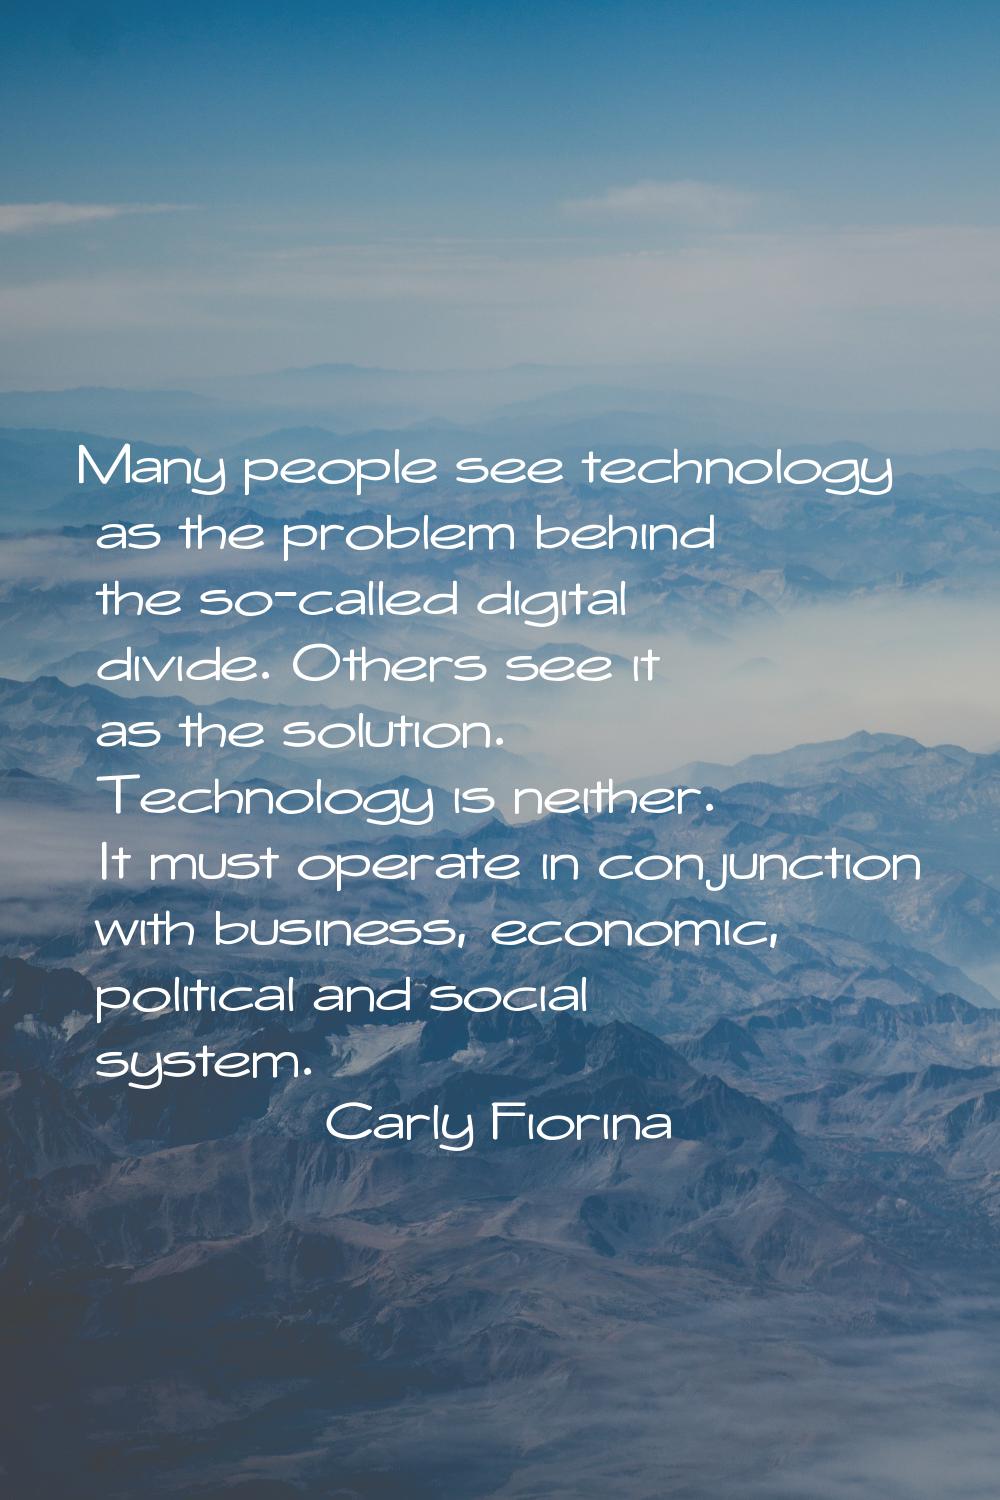 Many people see technology as the problem behind the so-called digital divide. Others see it as the